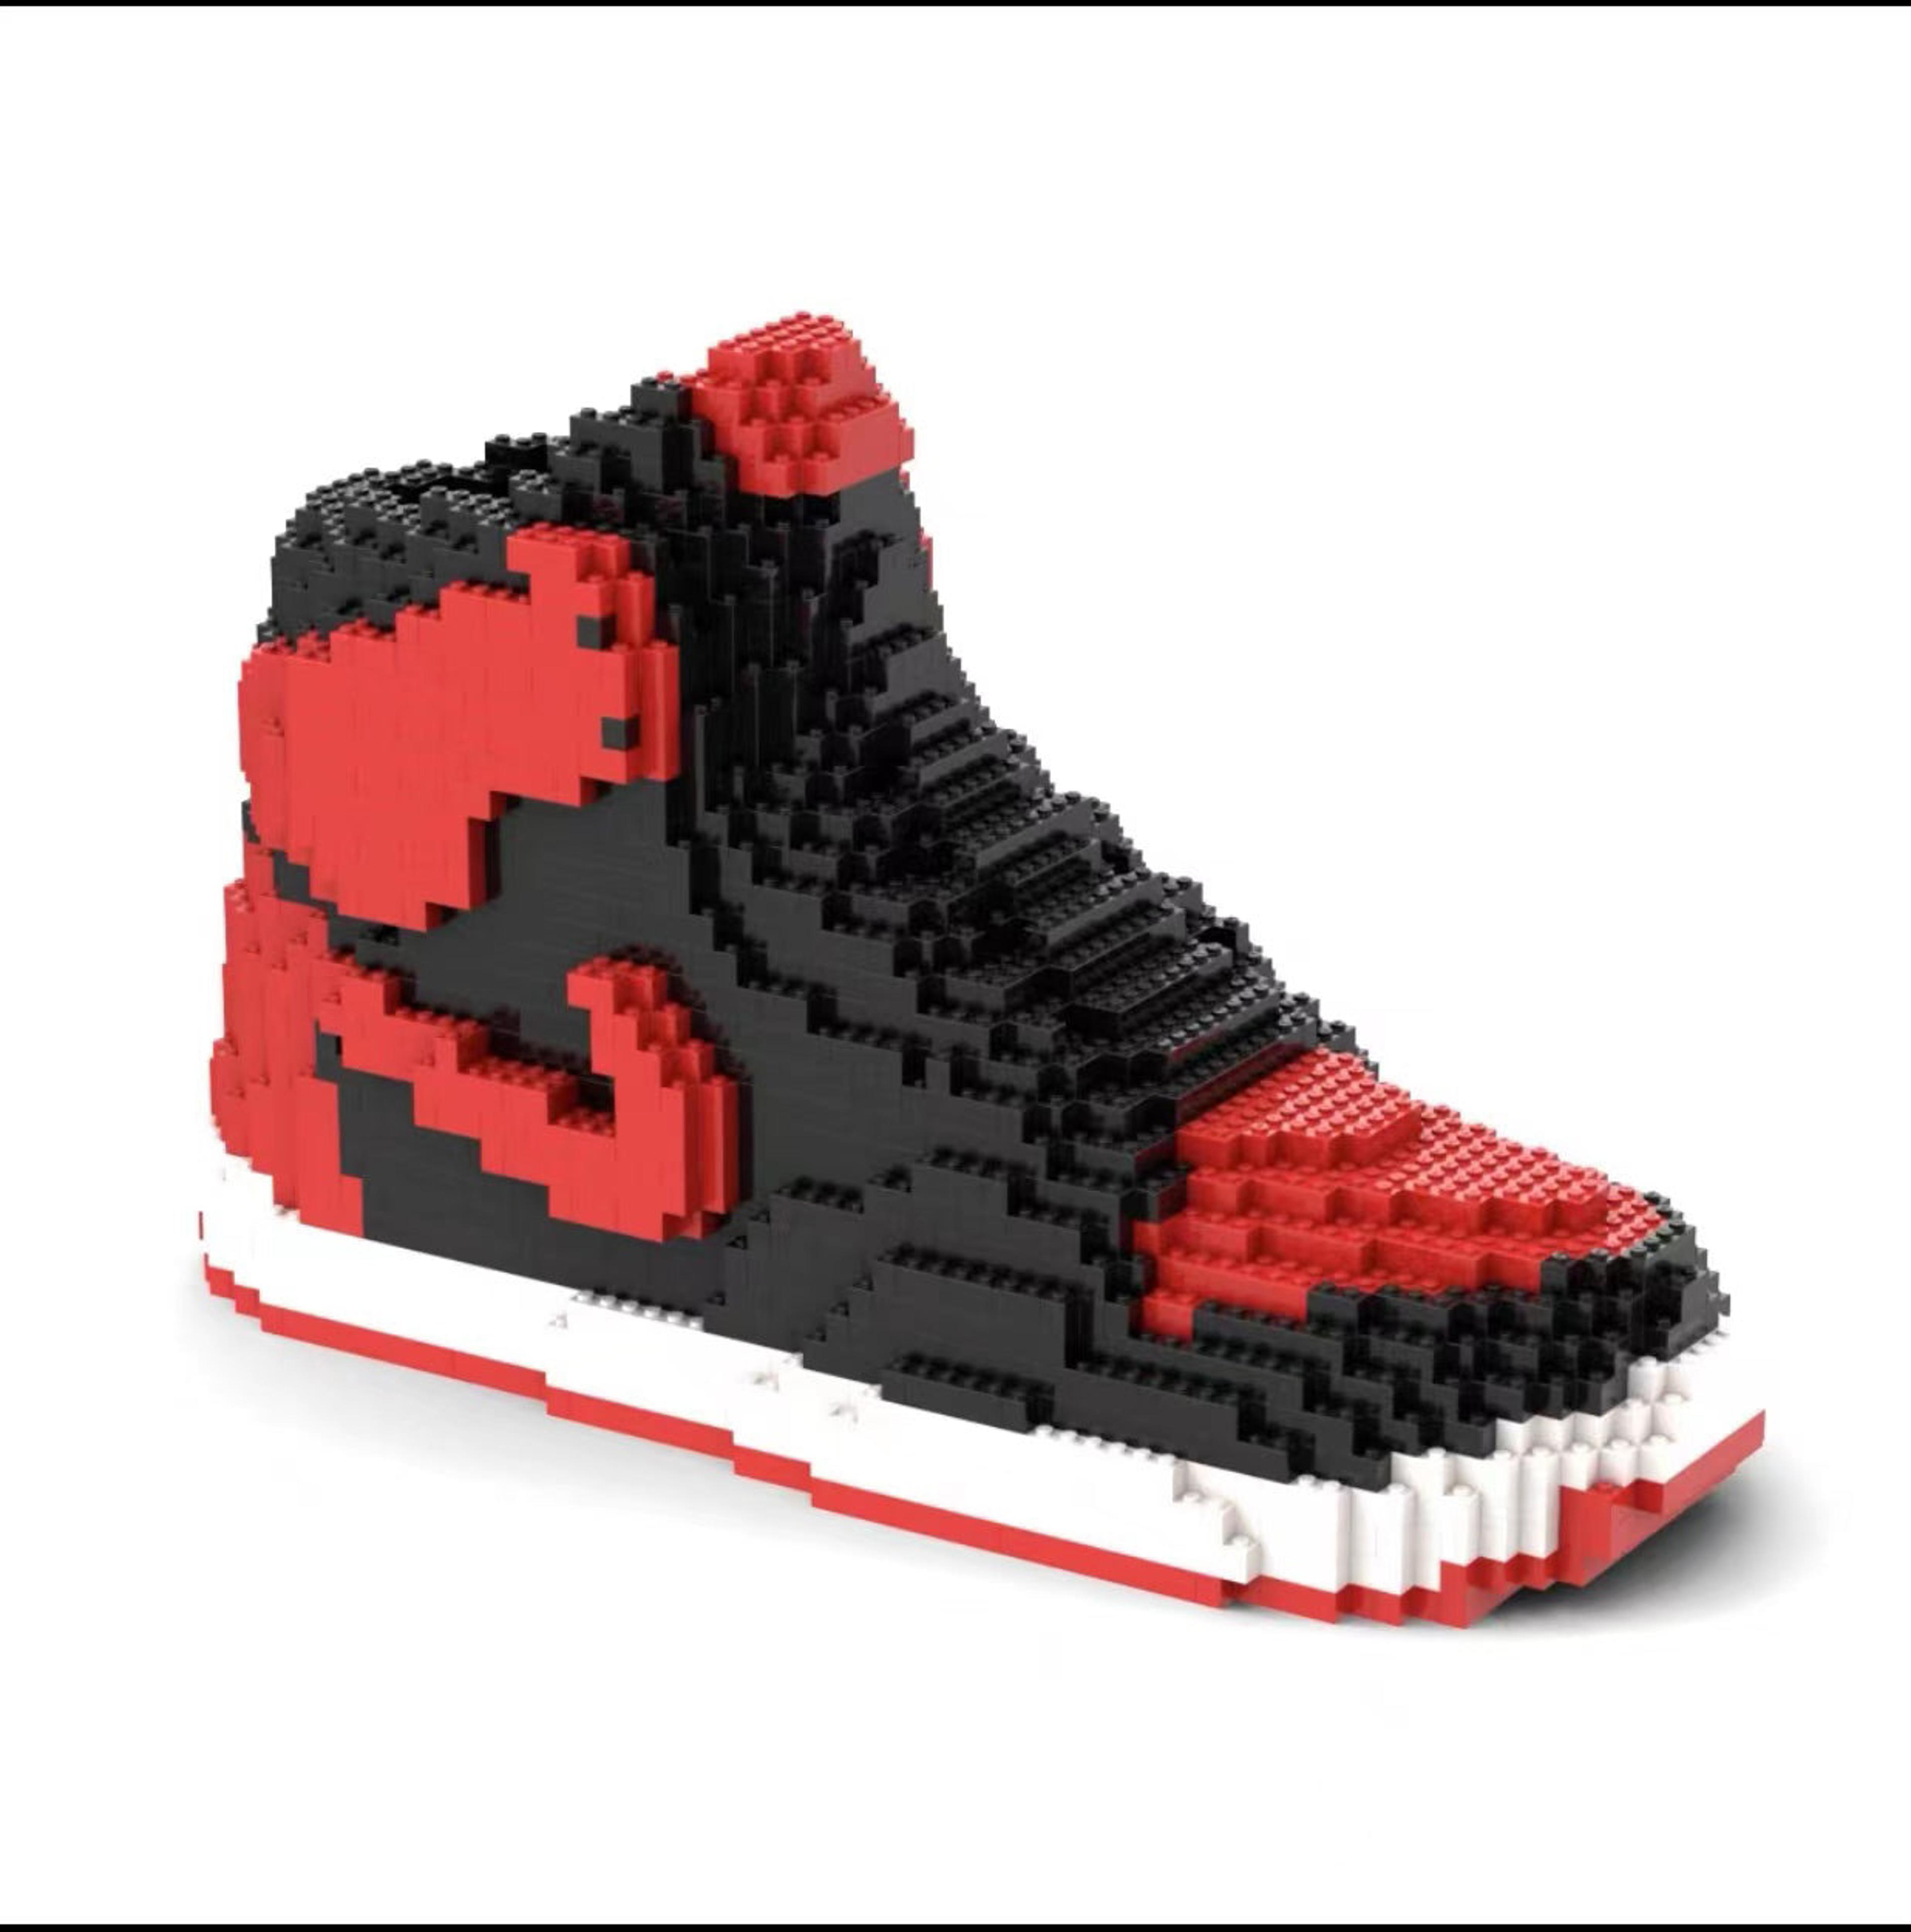 Alternate View 3 of GIANT SIZE ULTIMATE "Bred/Banned1S" Sneakers Bricks